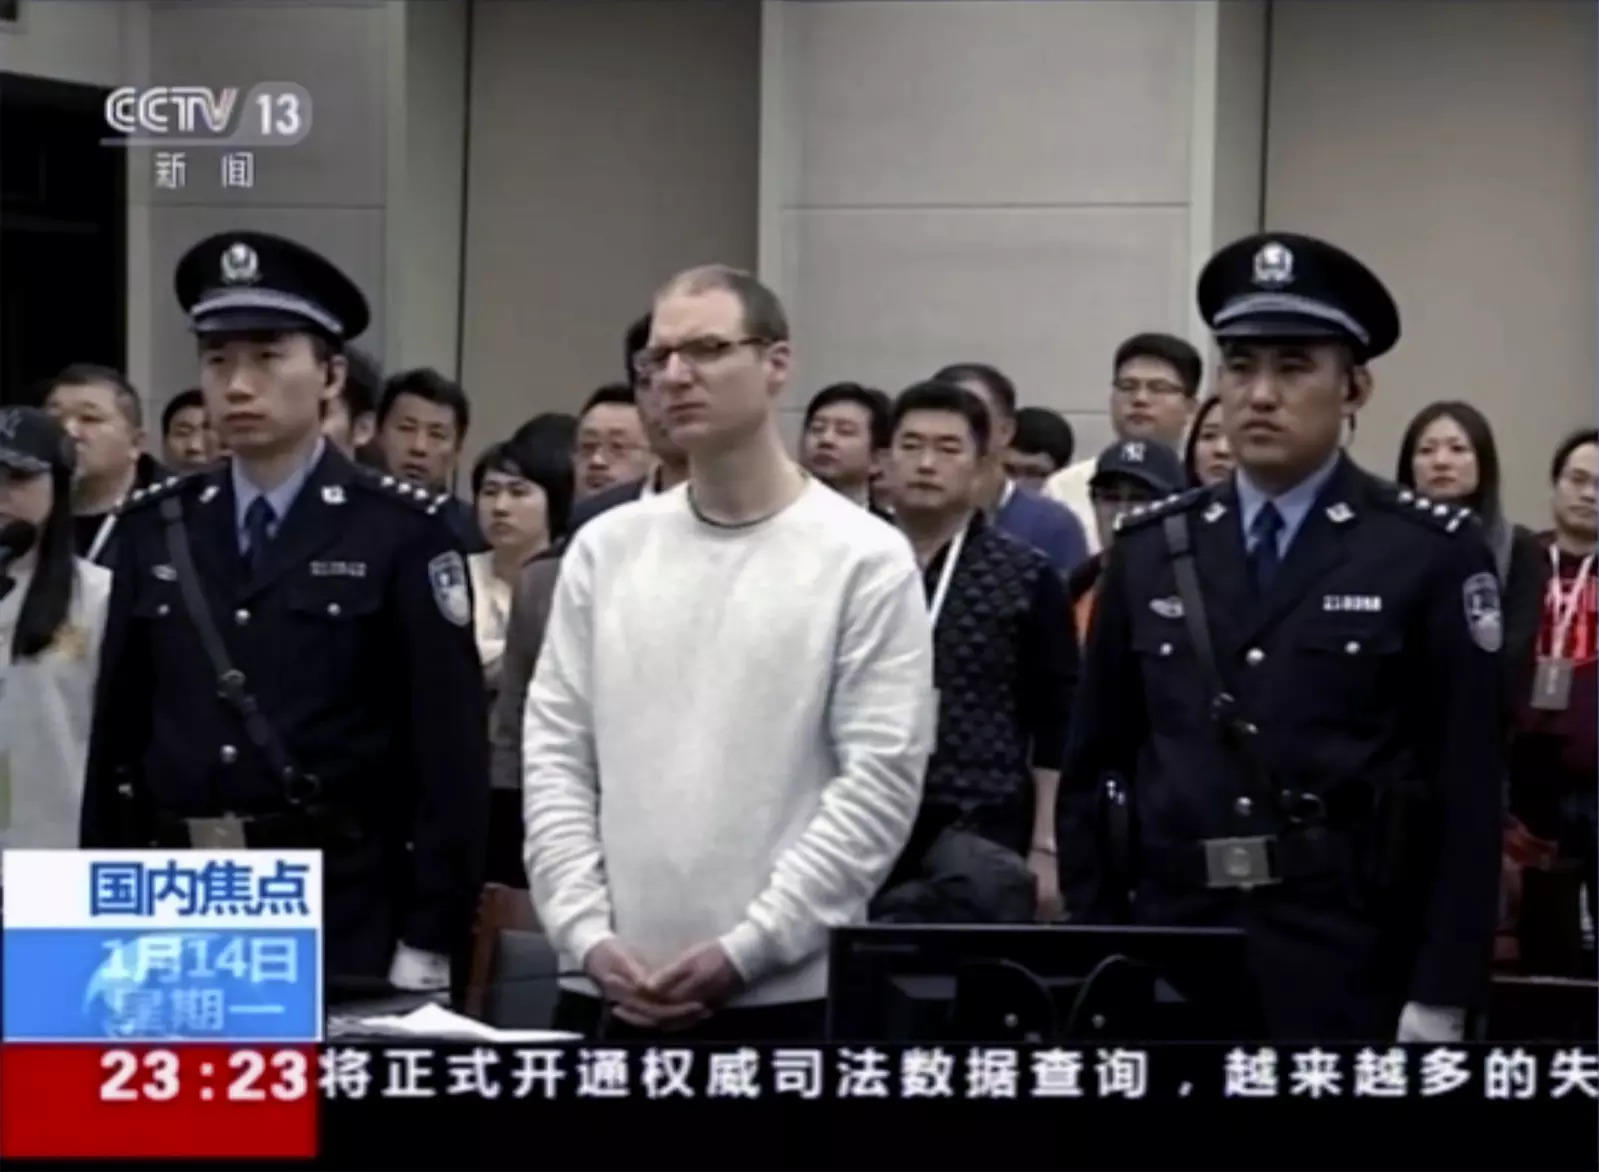 Video footage shows Canadian Robert Lloyd Schellenberg attends his retrial at the Dalian Intermediate People's Court in Dalian, northeastern China's Liaoning province.  